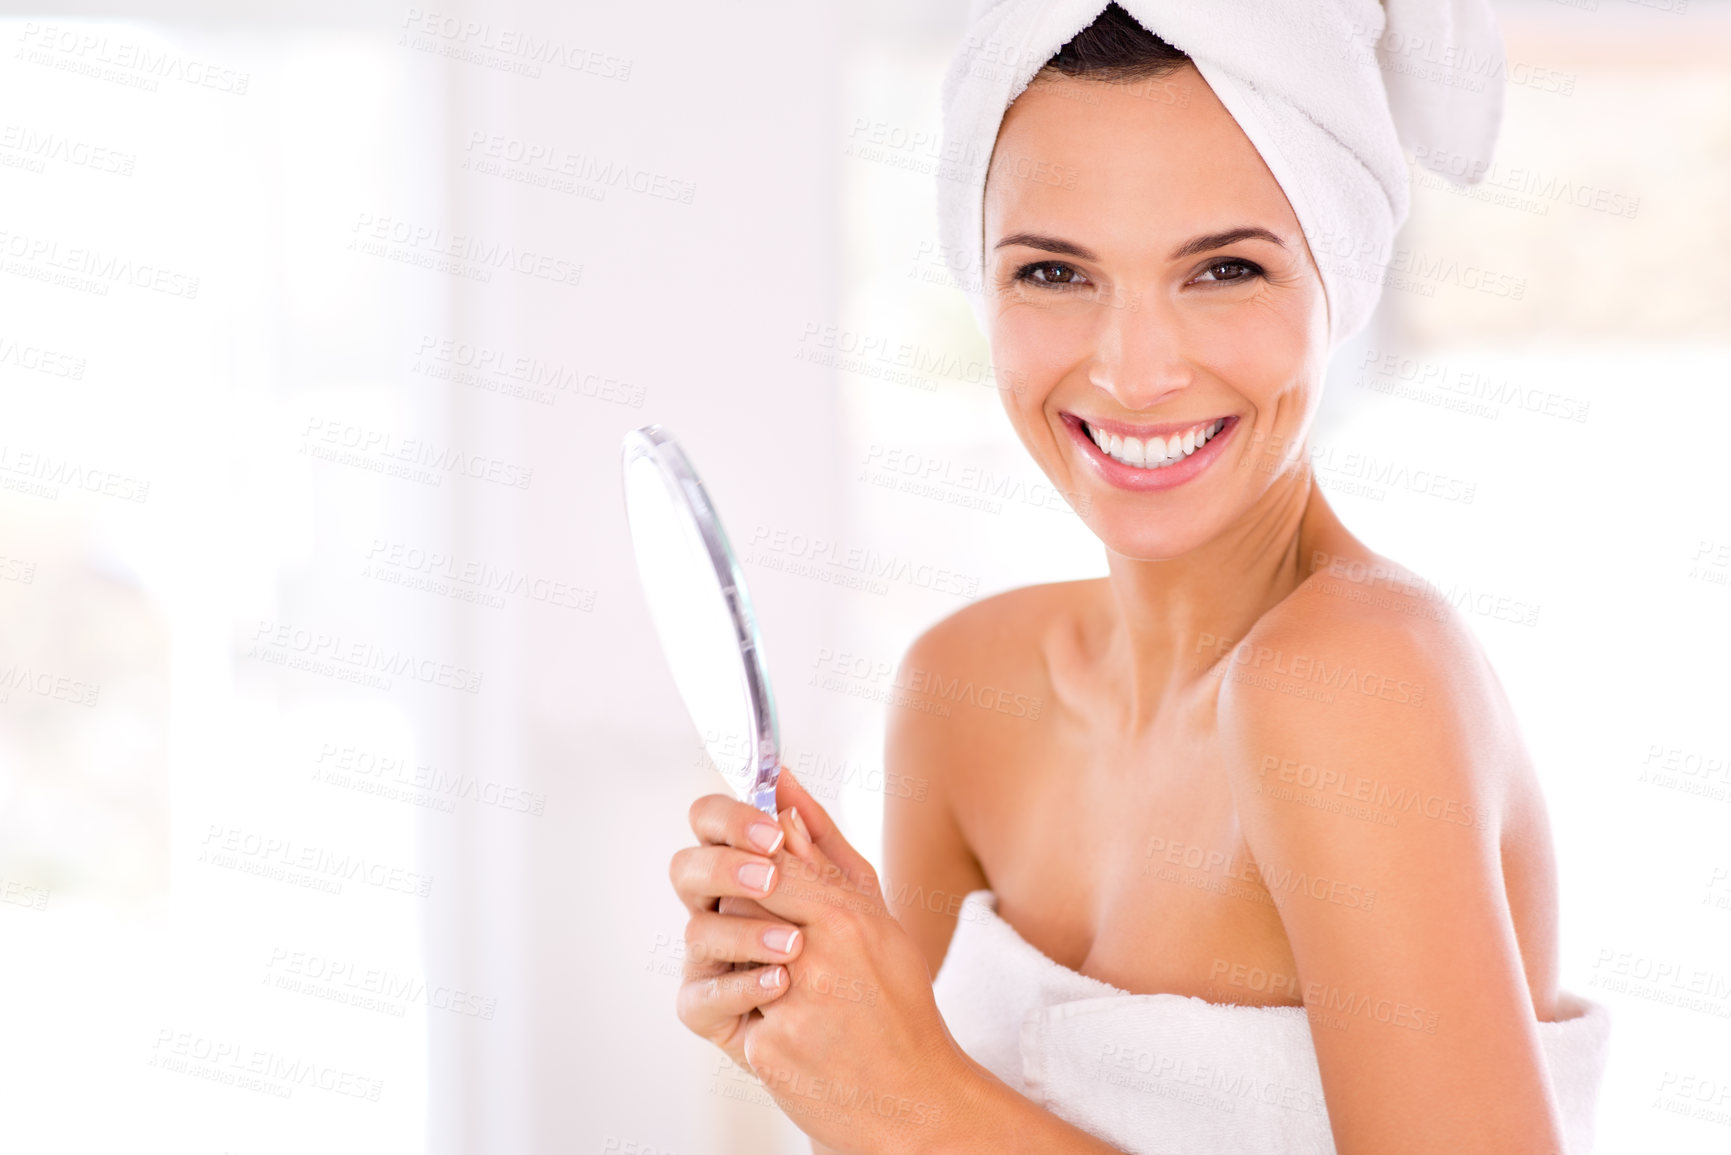 Buy stock photo Portrait of a beautiful woman smiling while holding a hand mirror